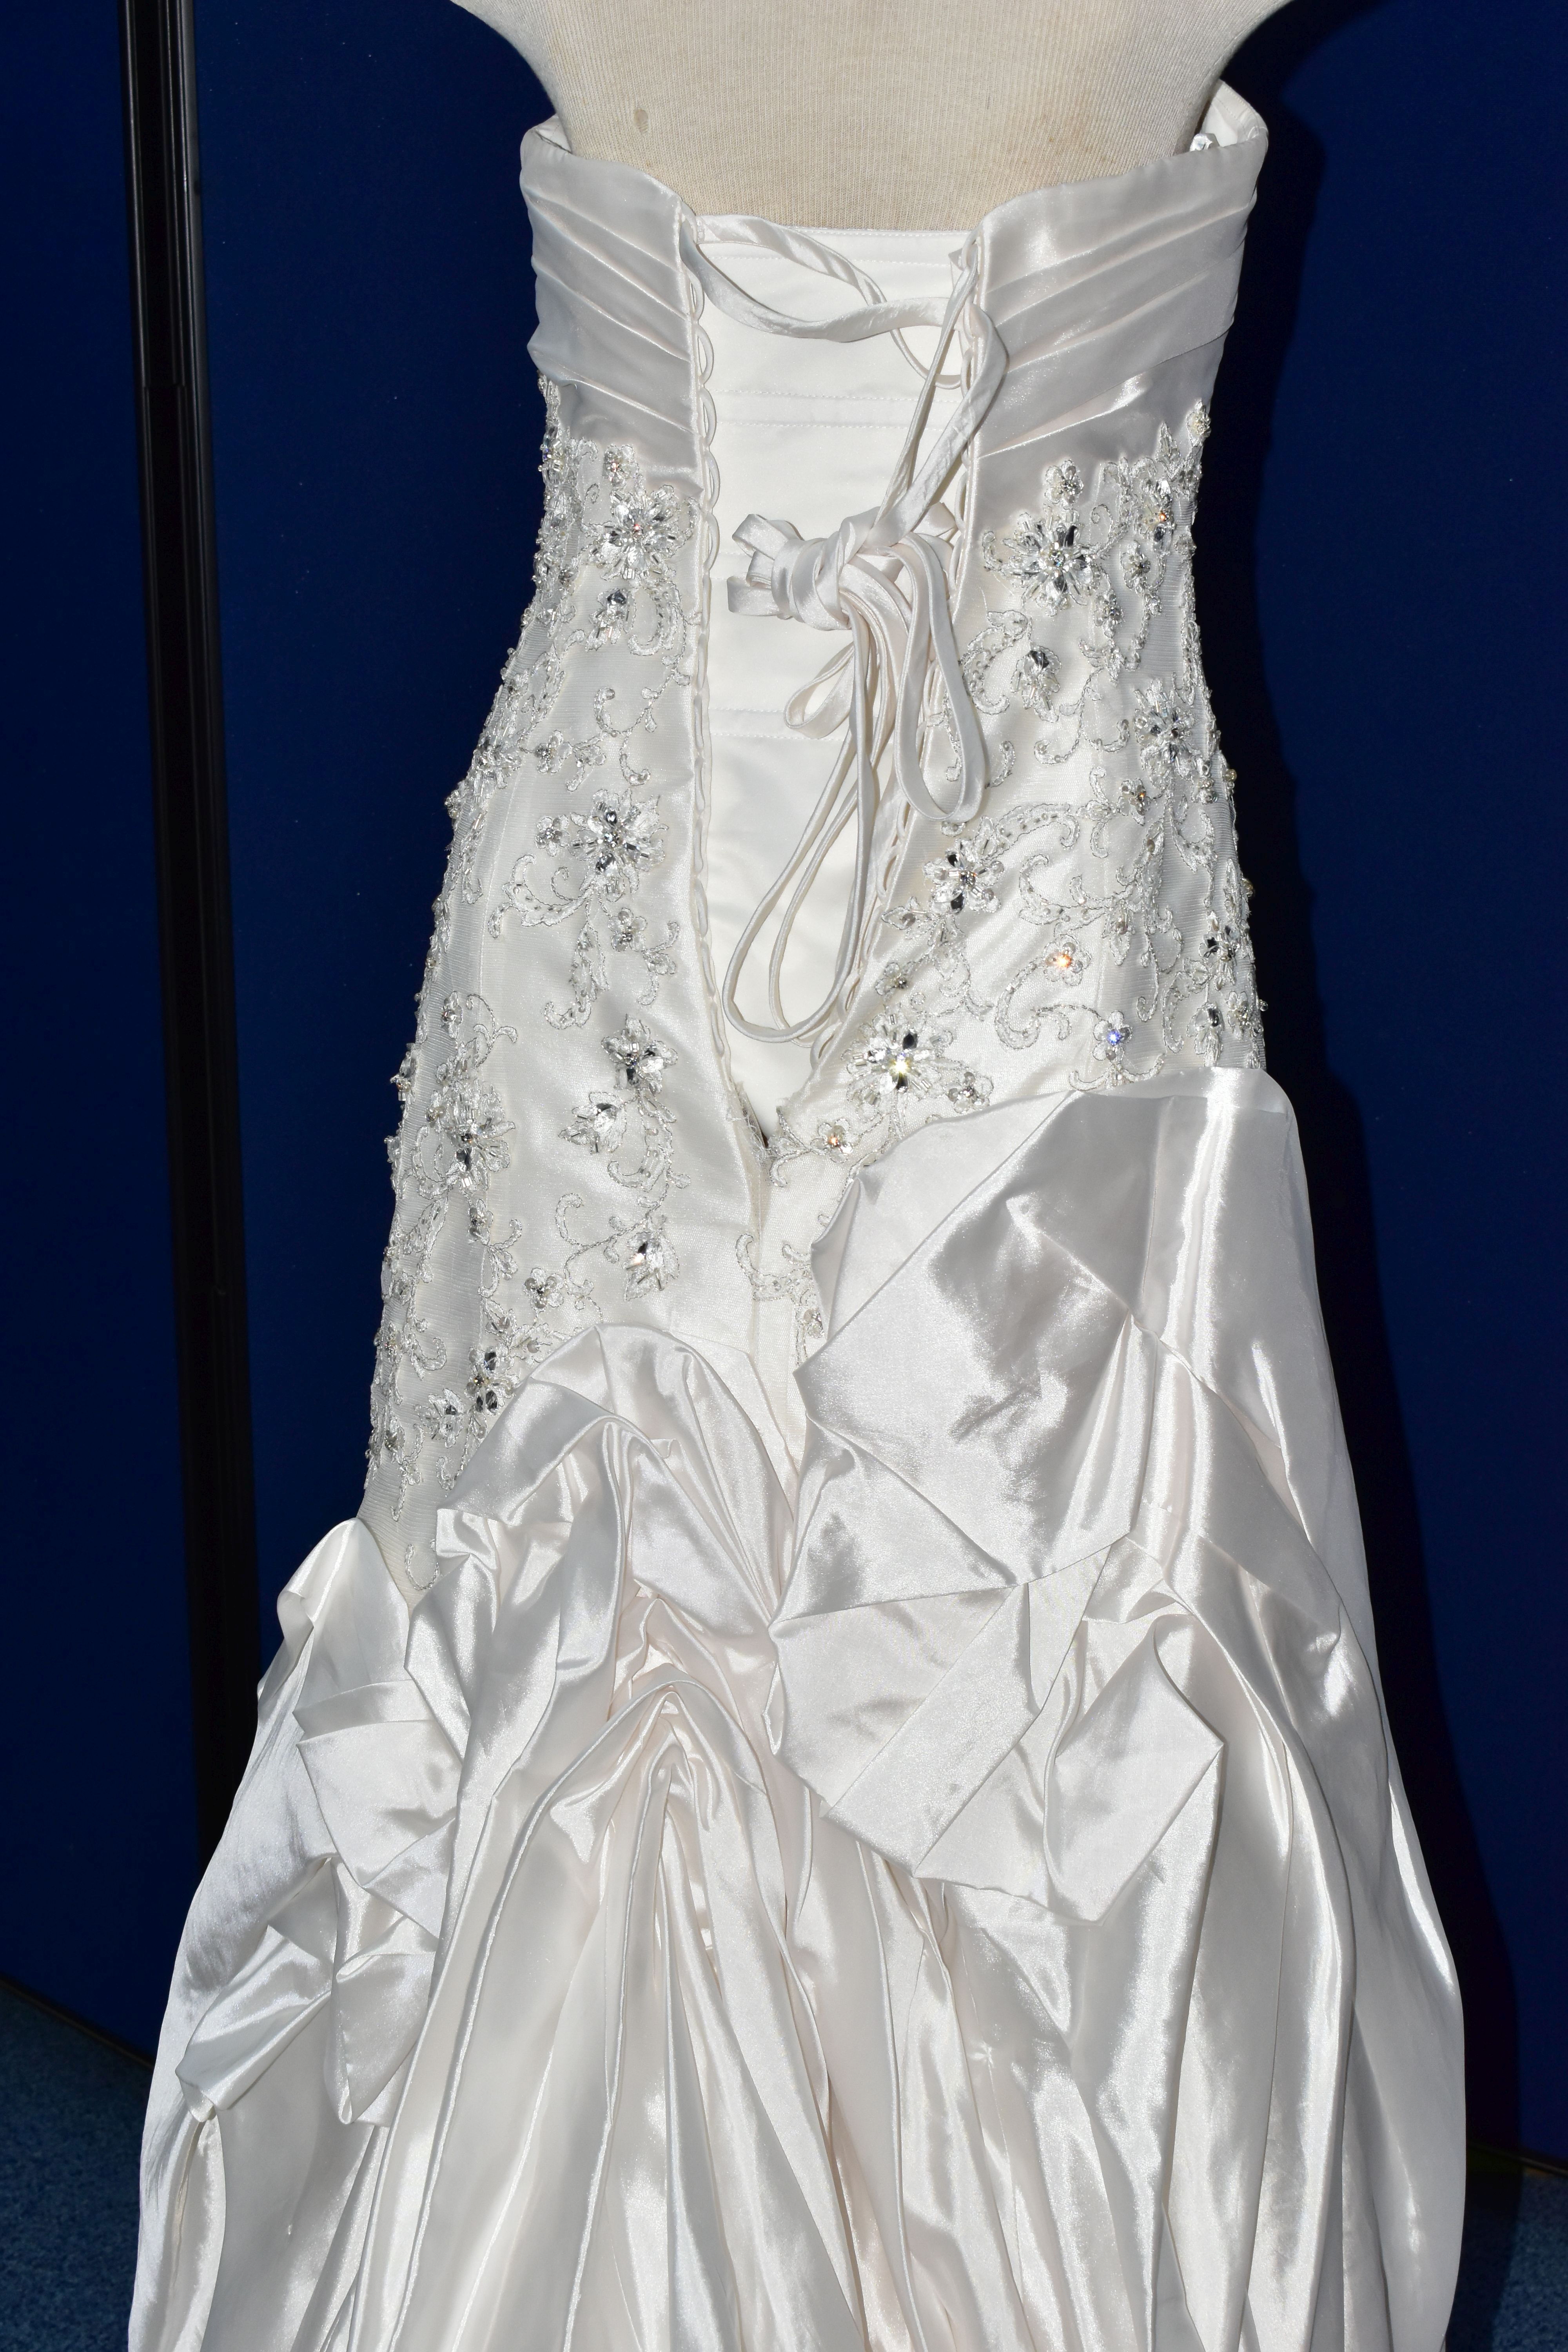 WEDDING GOWN, 'Sophia Tolli', size 10, champagne with satin bodice, pewter beaded appliques (1) - Image 11 of 13